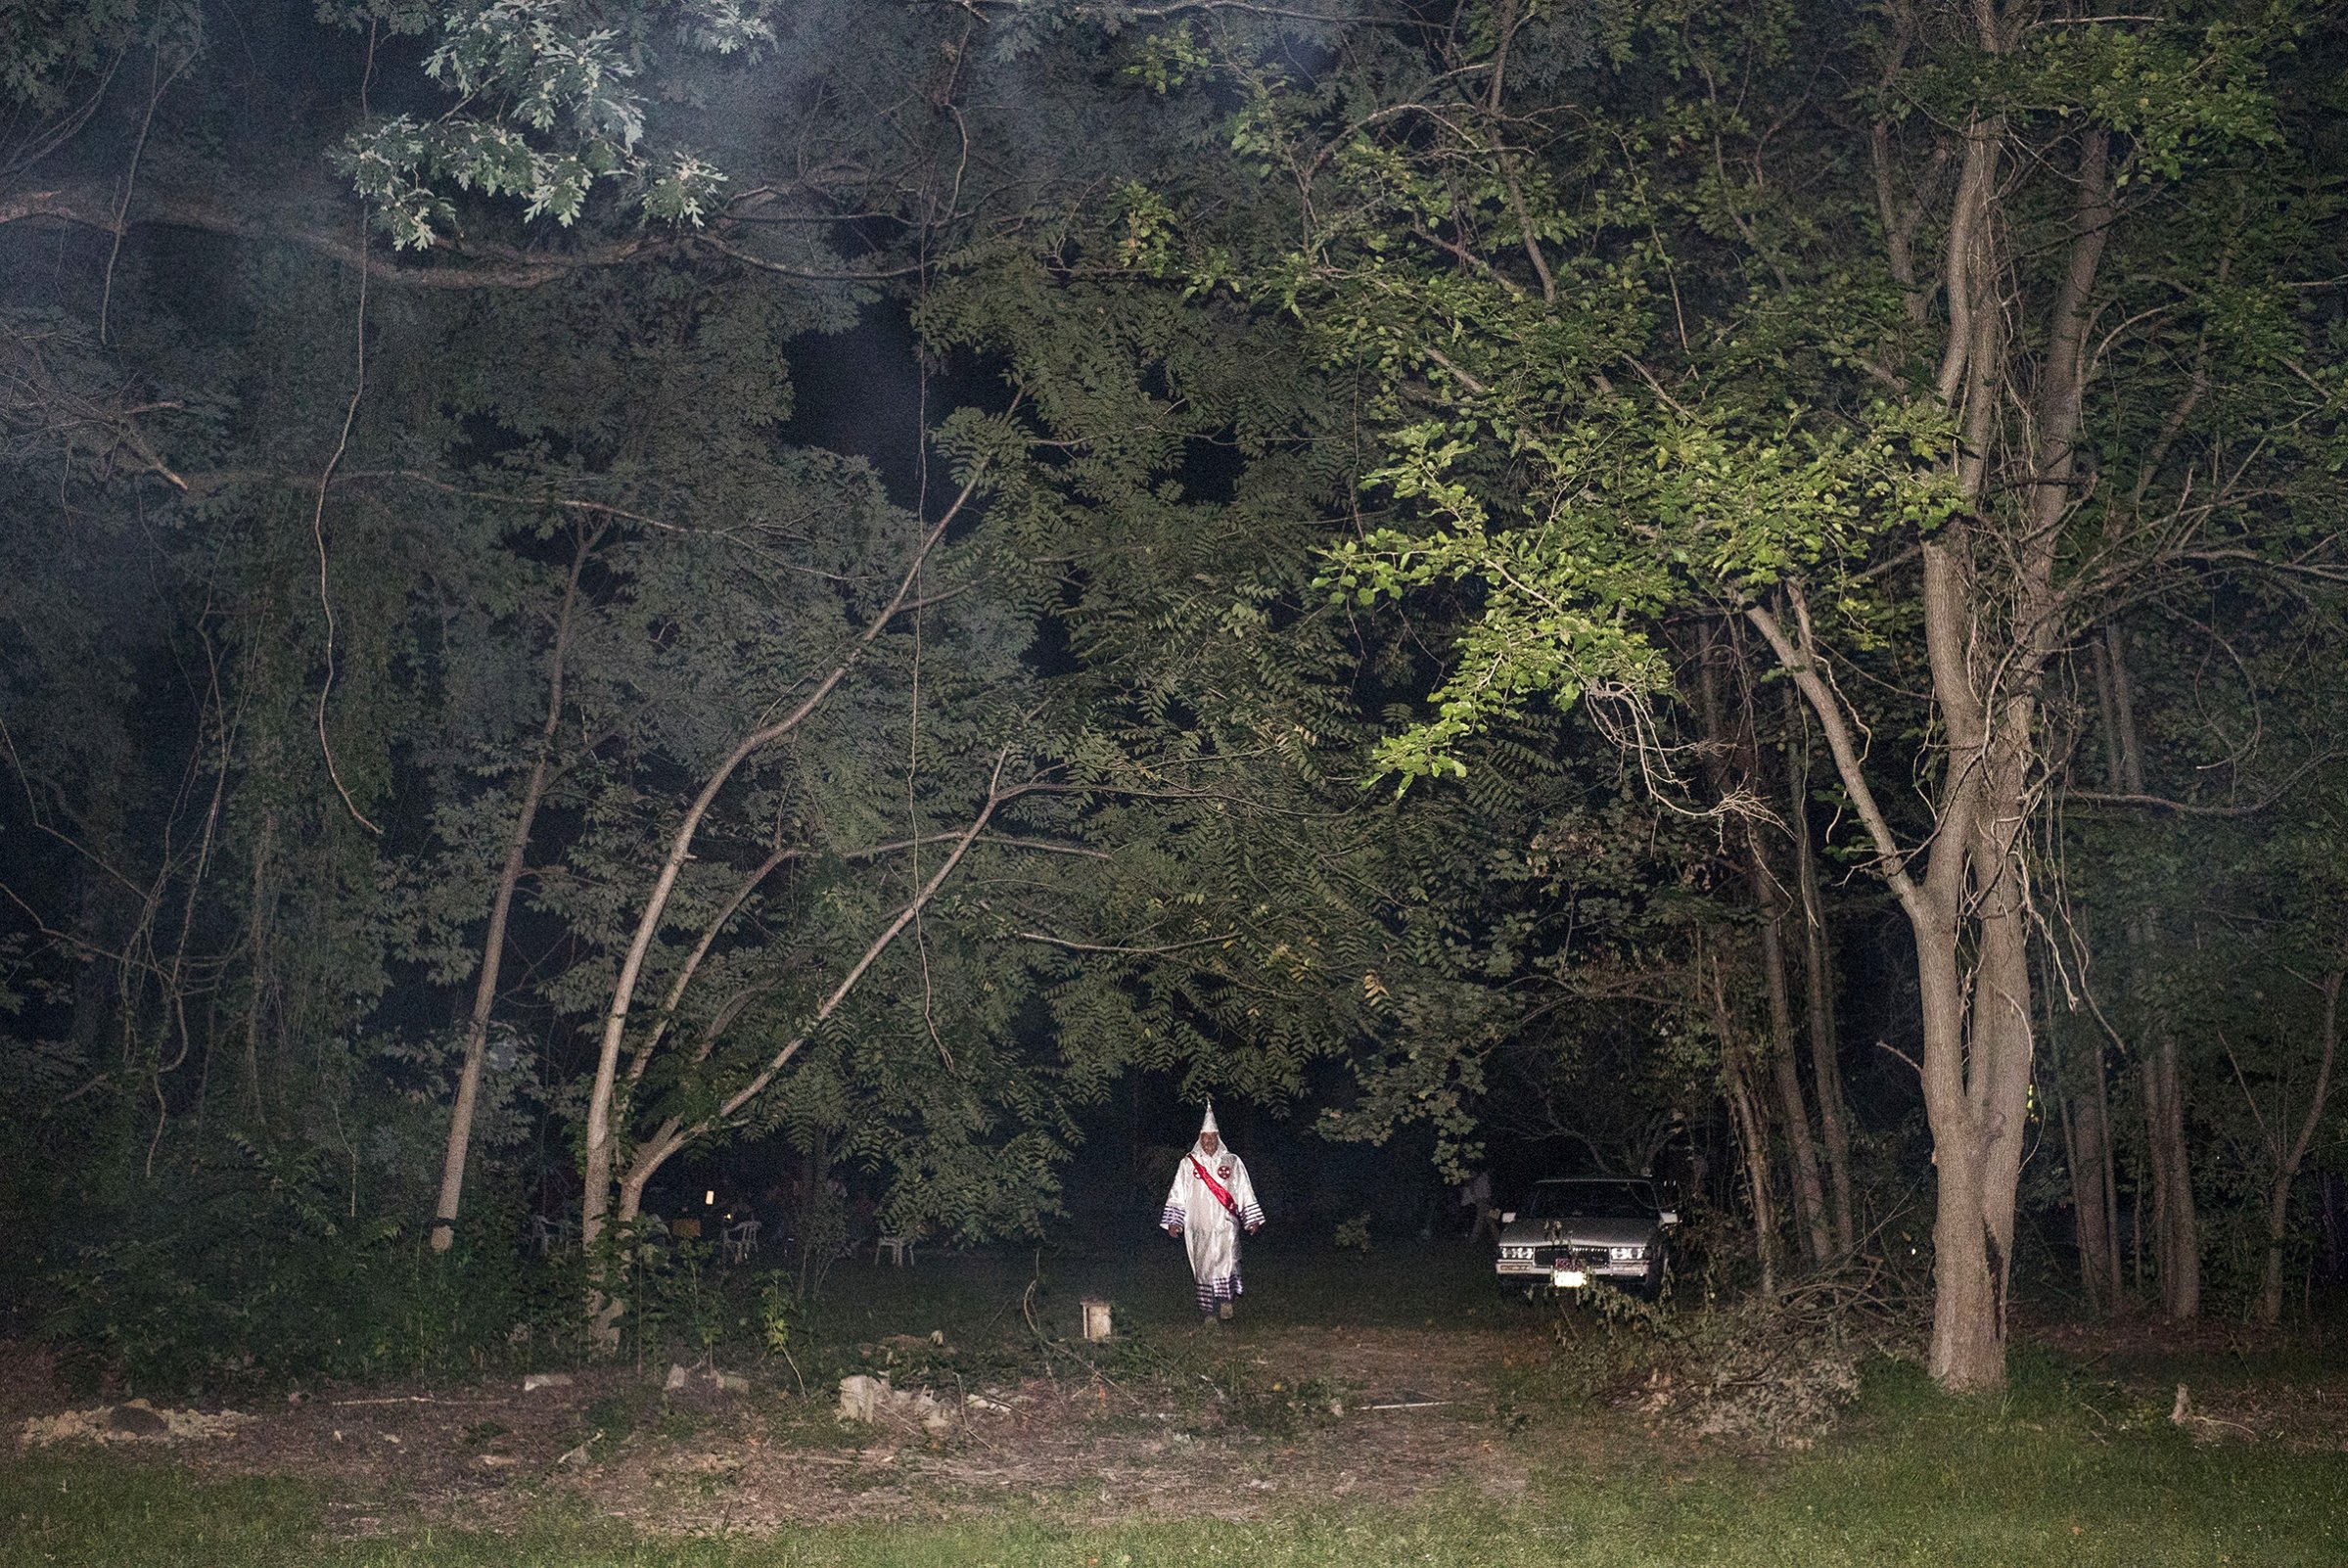 A Ku Klux Klan member in 2015 after a Maryland cross lighting, one of the group’s rituals